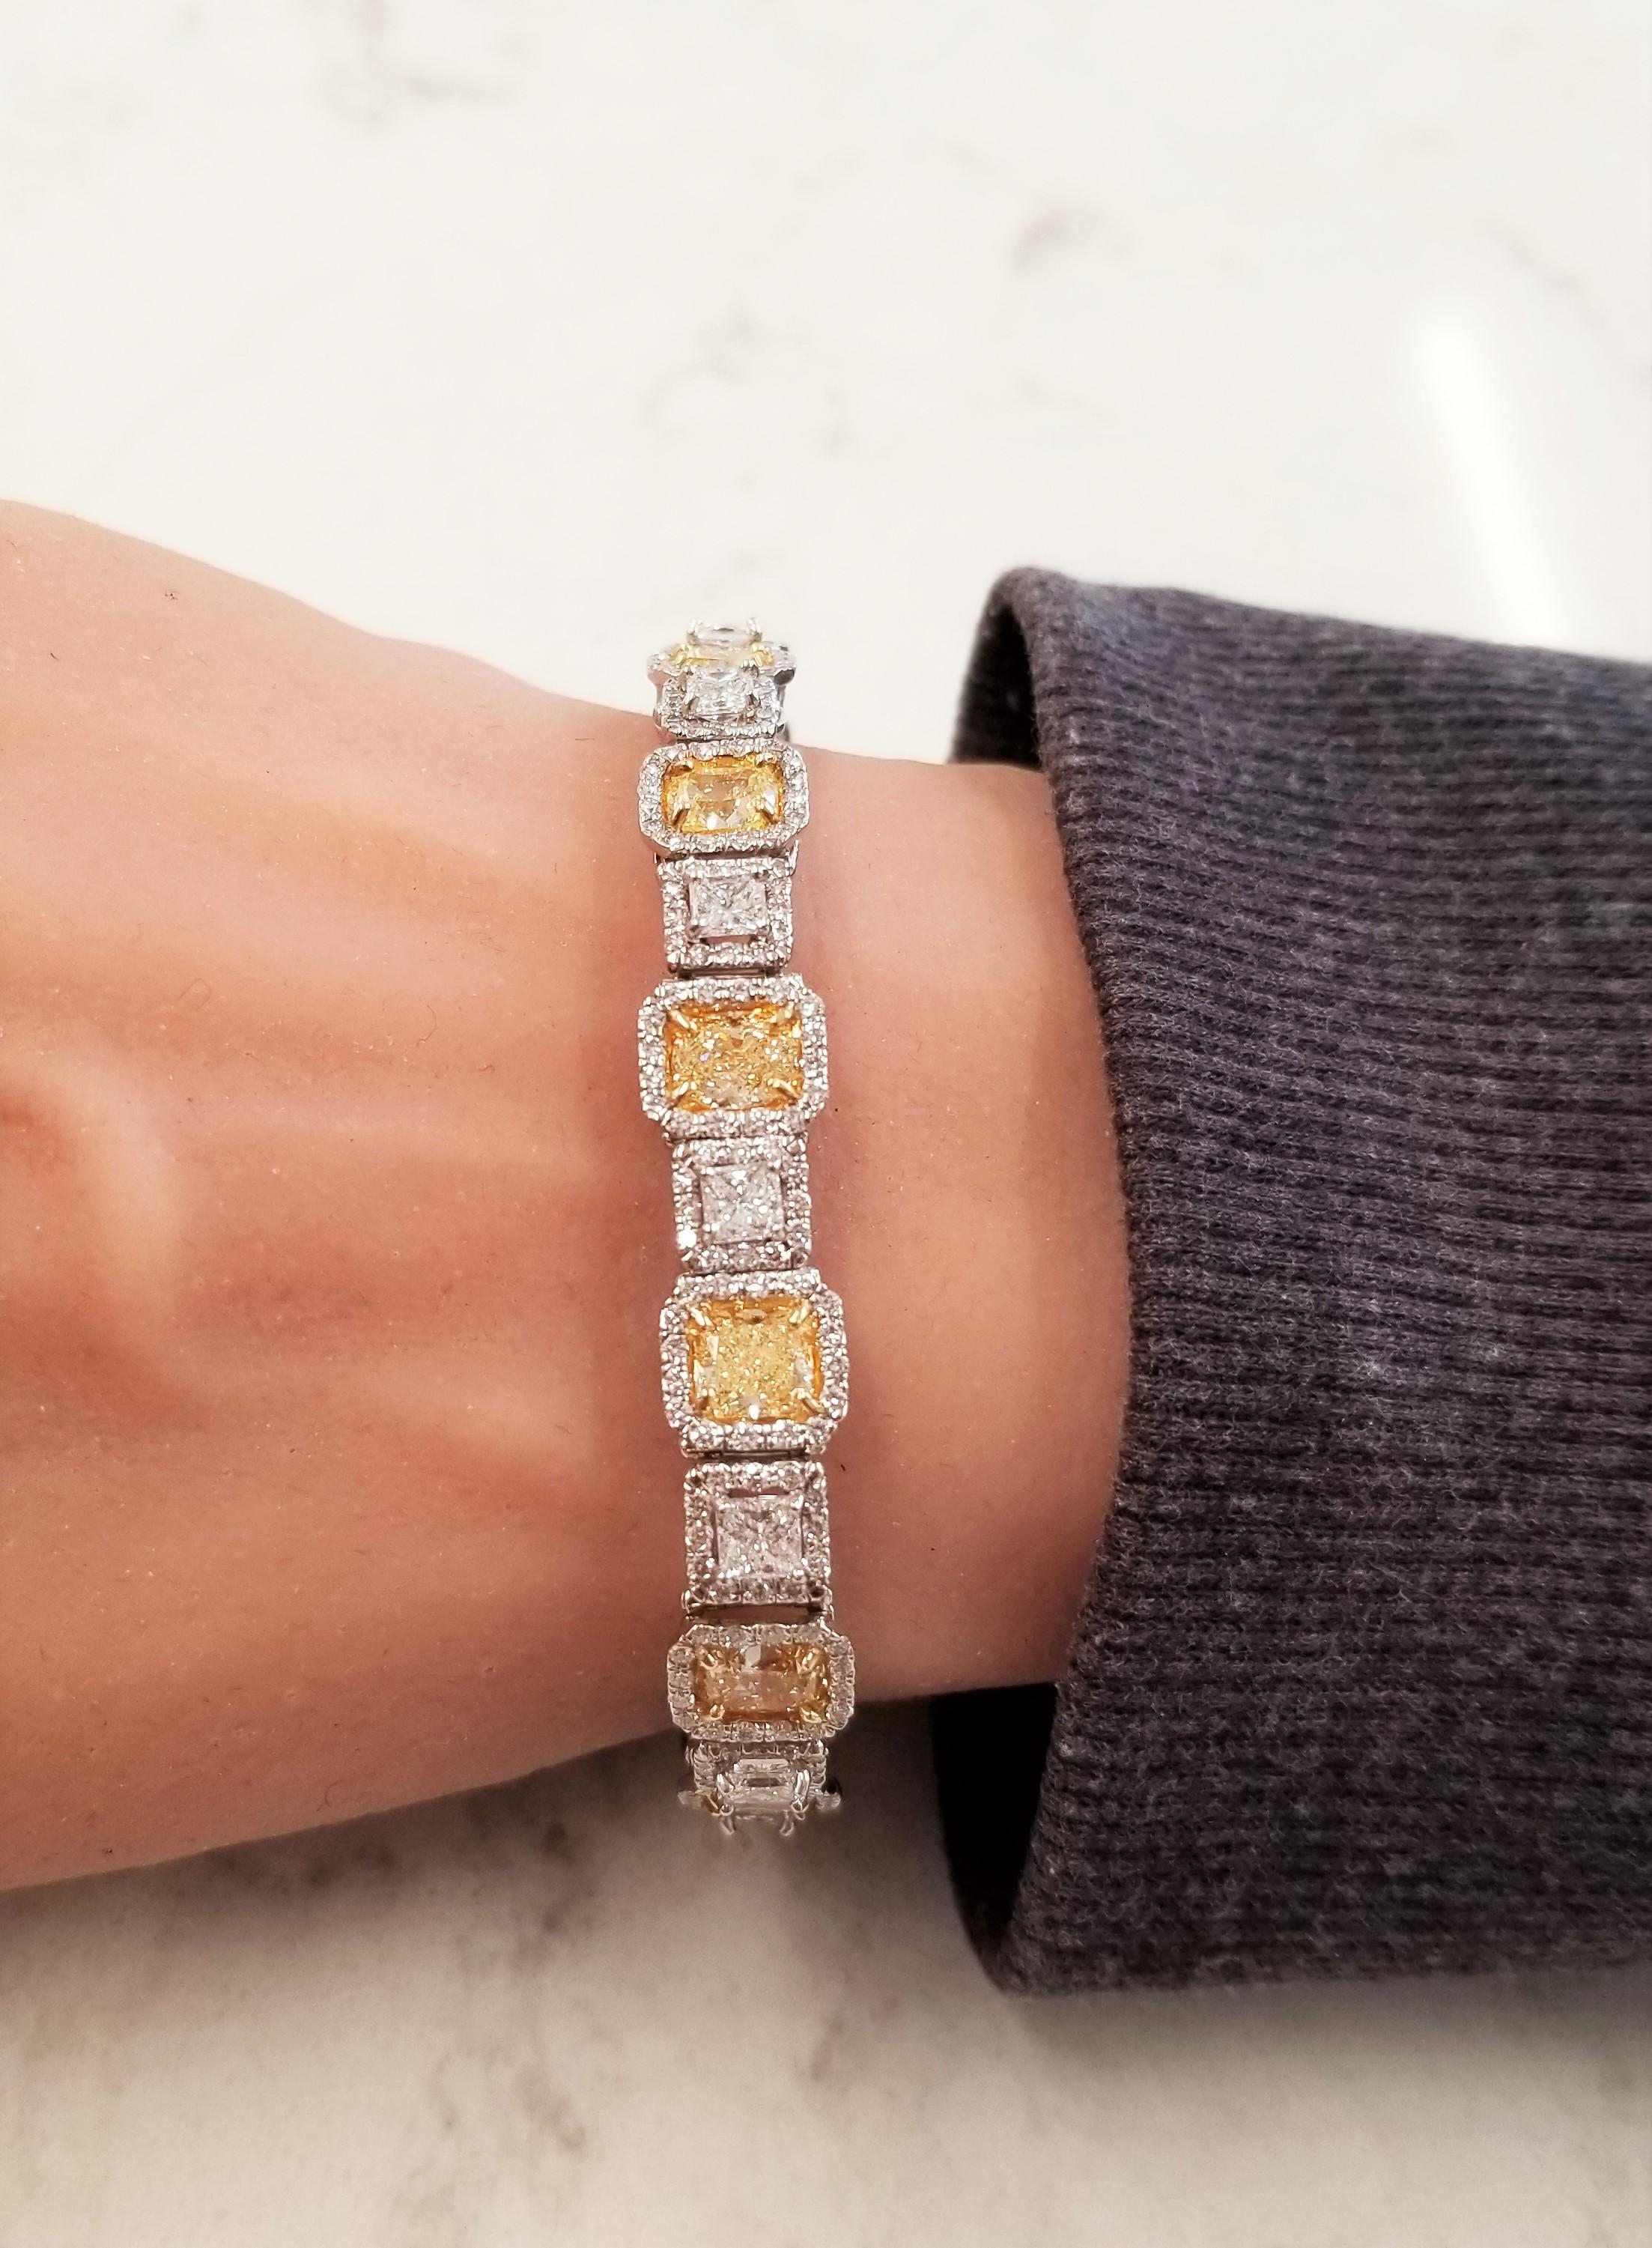 This bracelet is pure diamond luxury. 13 natural fancy yellow cushion cut diamonds weigh 10.5 carats and are paired with 13 stunning princess cut white diamonds totaling 3.55 carats. The construction of this bracelet is superb. The natural yellows